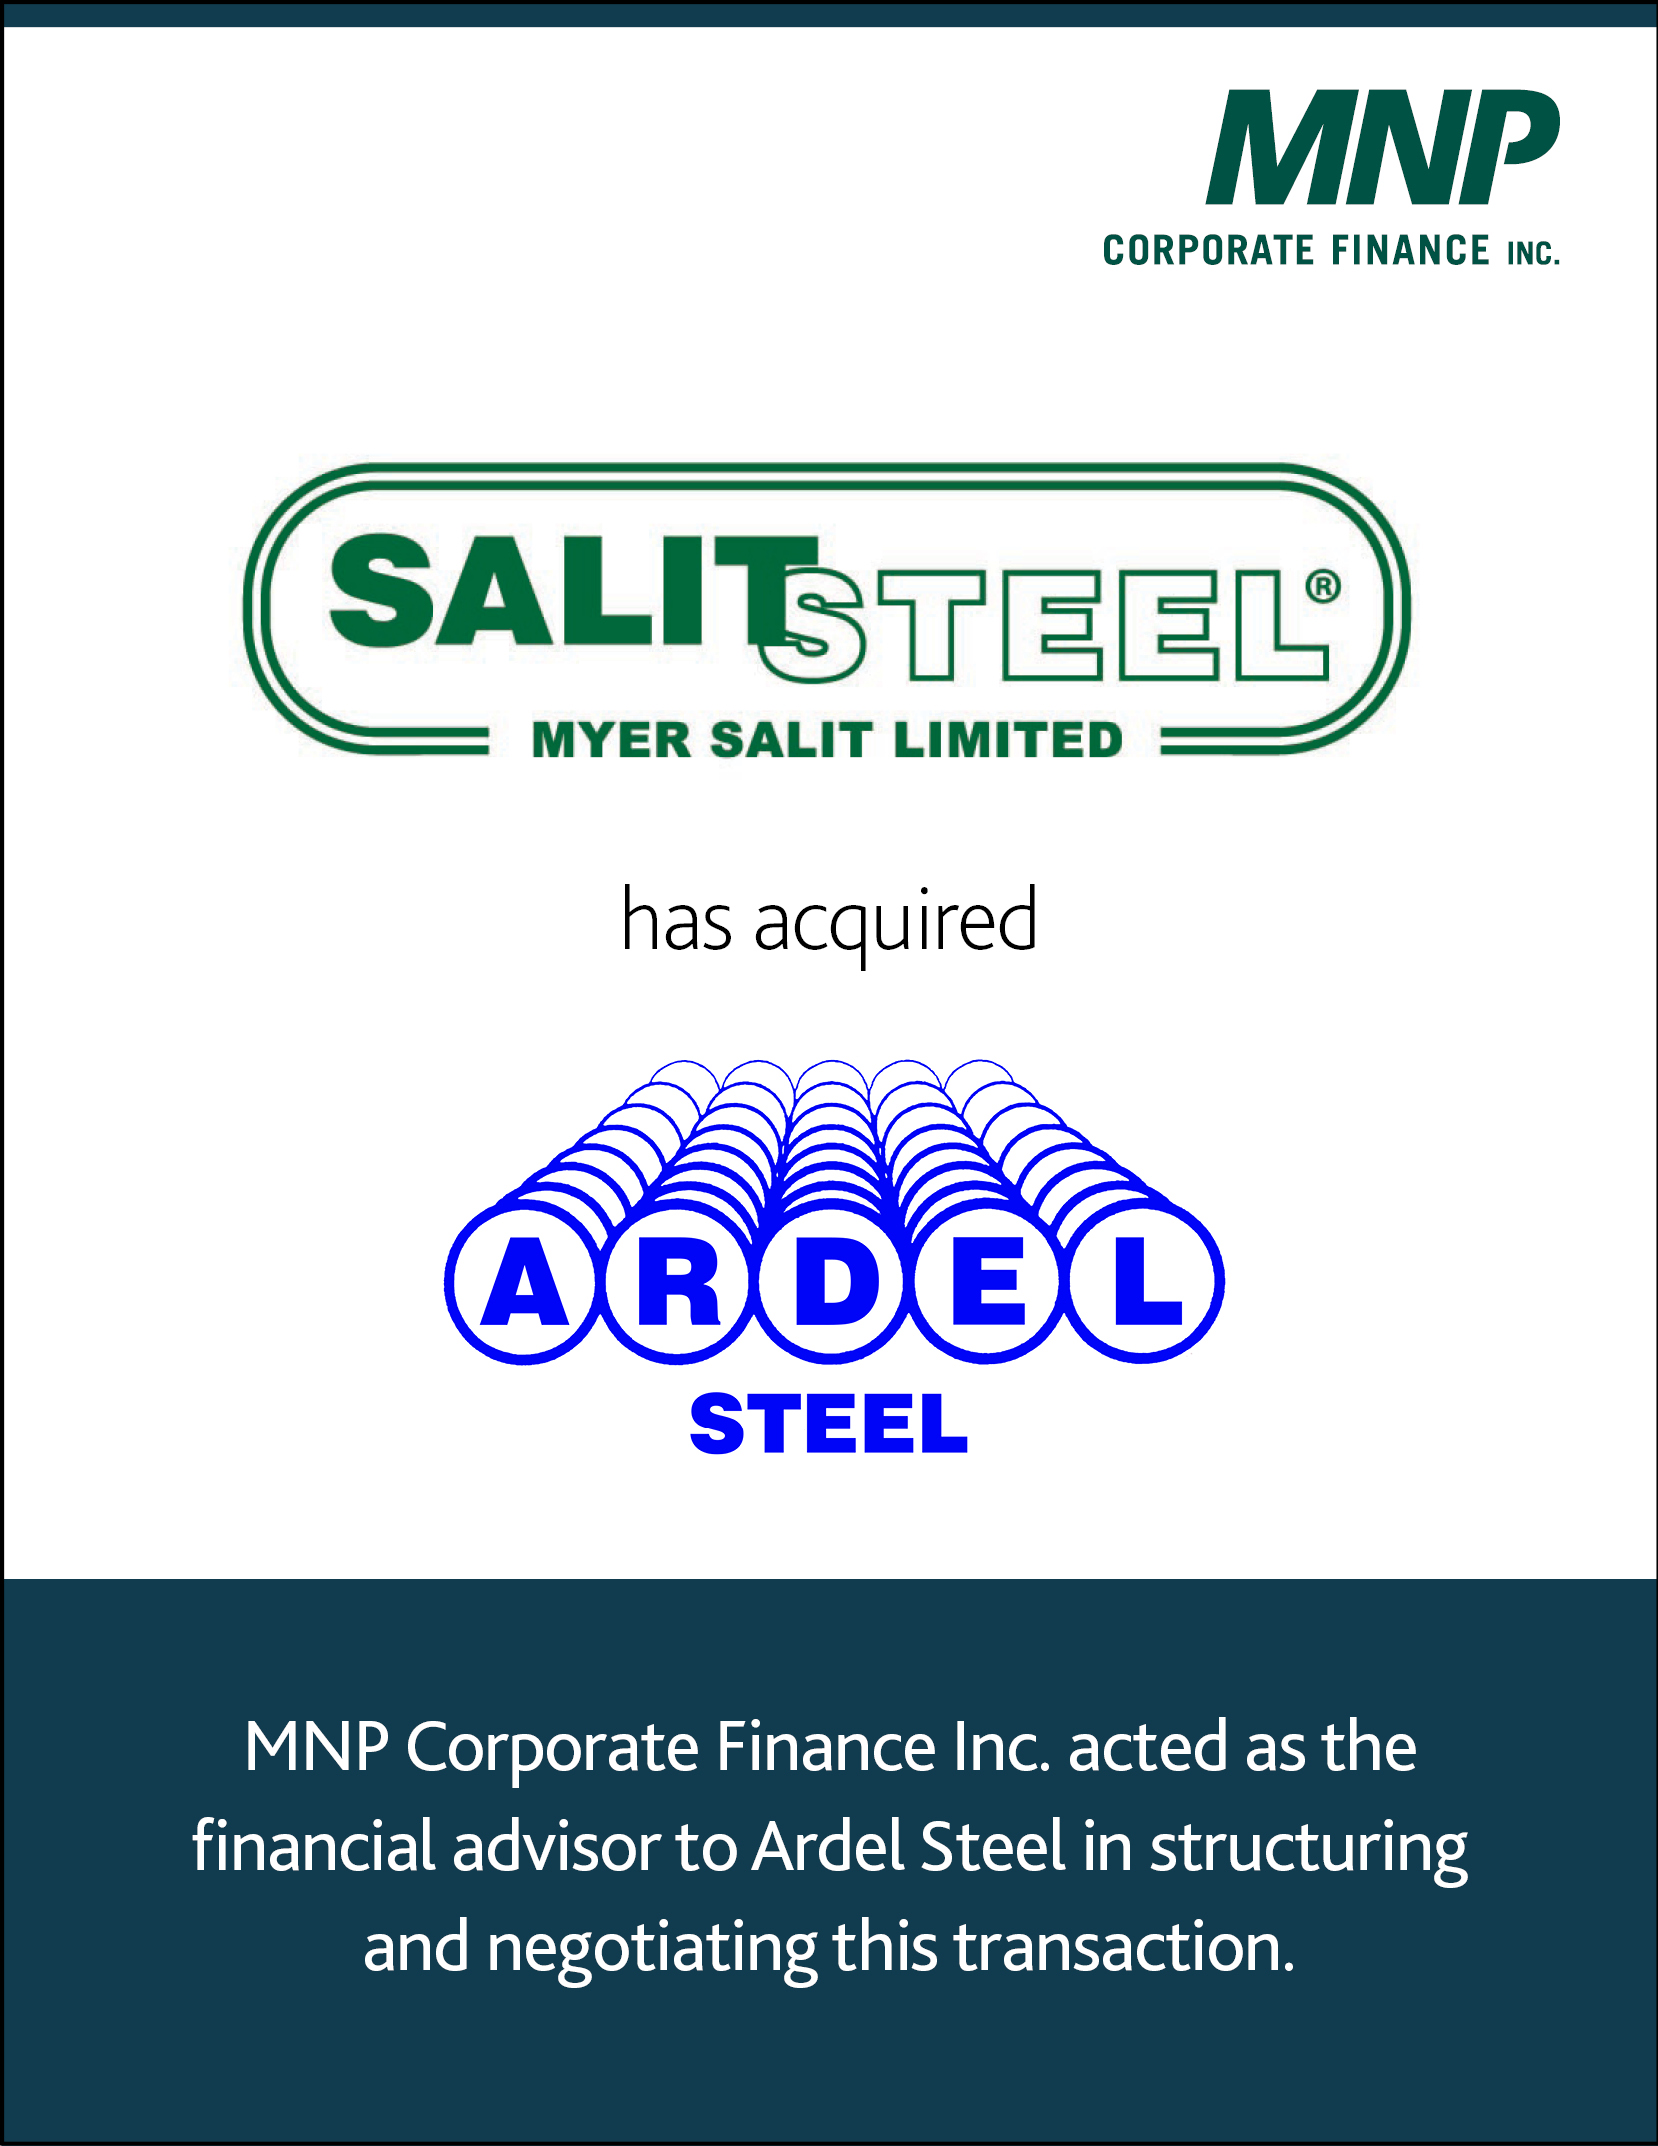 Salit Steel Myer Salt Limited has Acquired Ardel Steel